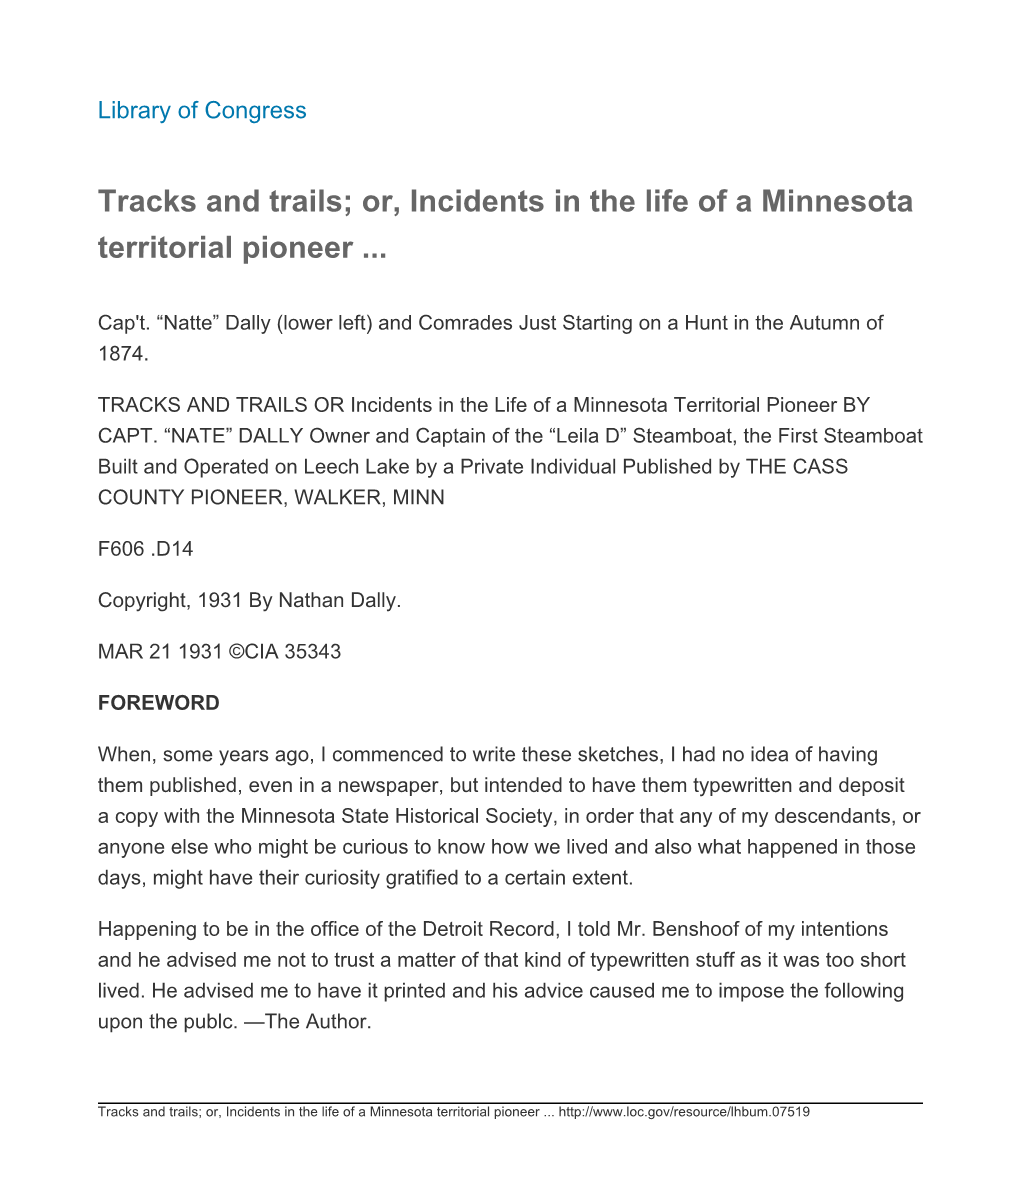 Tracks and Trails; Or, Incidents in the Life of a Minnesota Territorial Pioneer